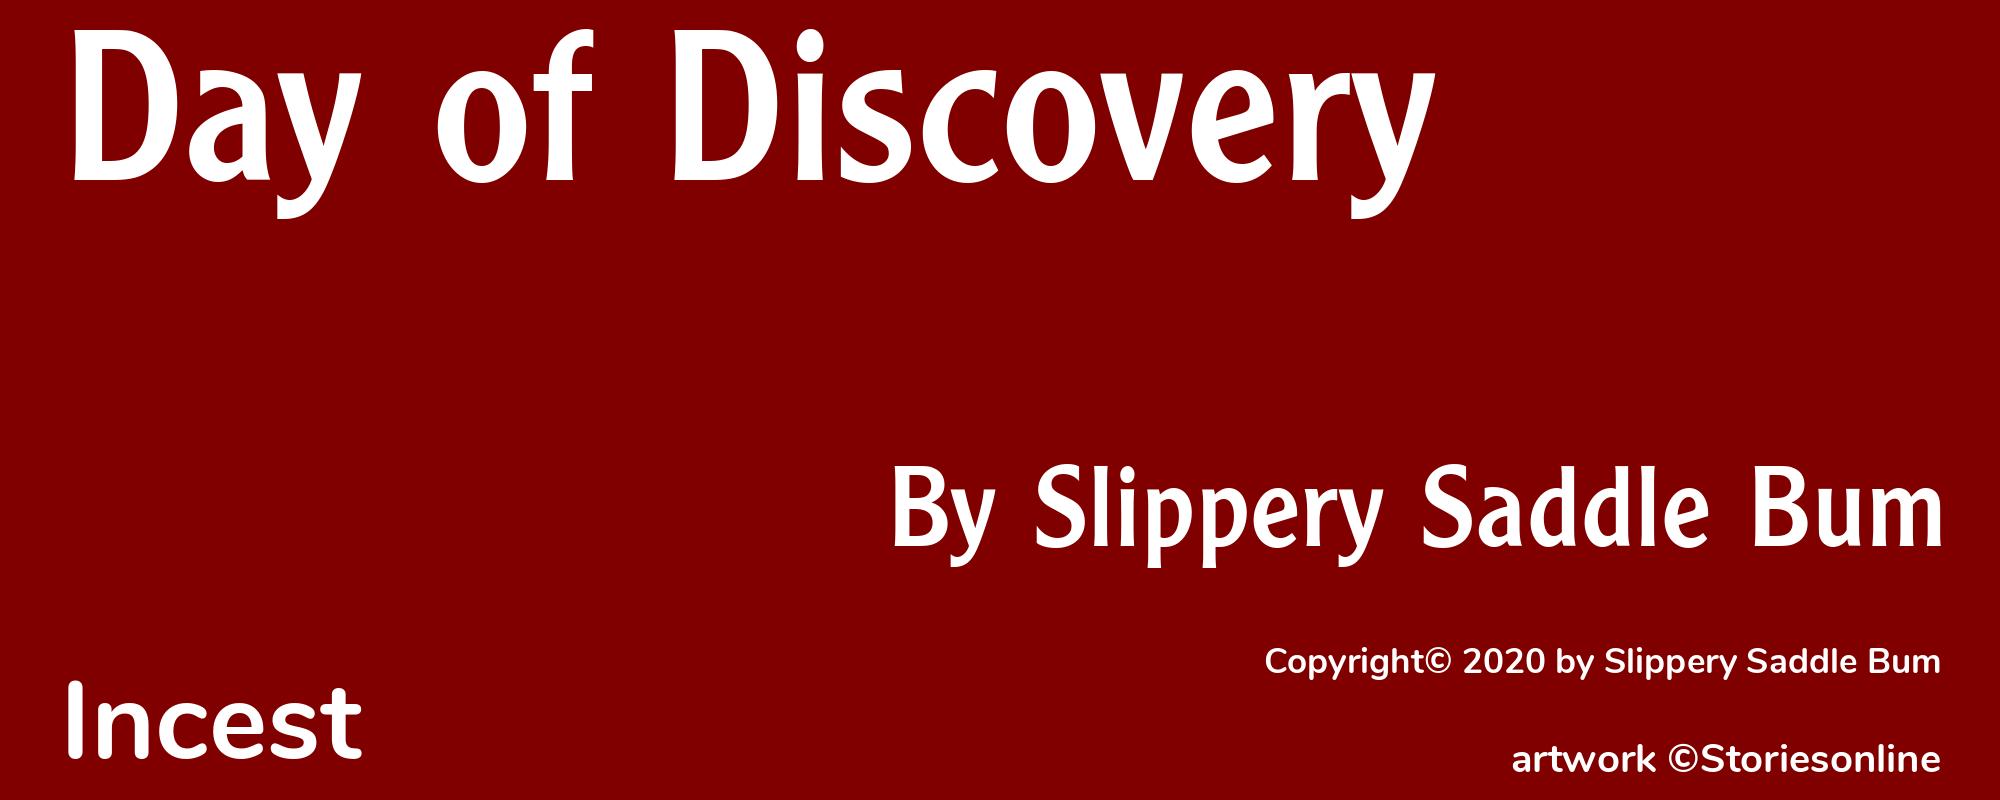 Day of Discovery - Cover